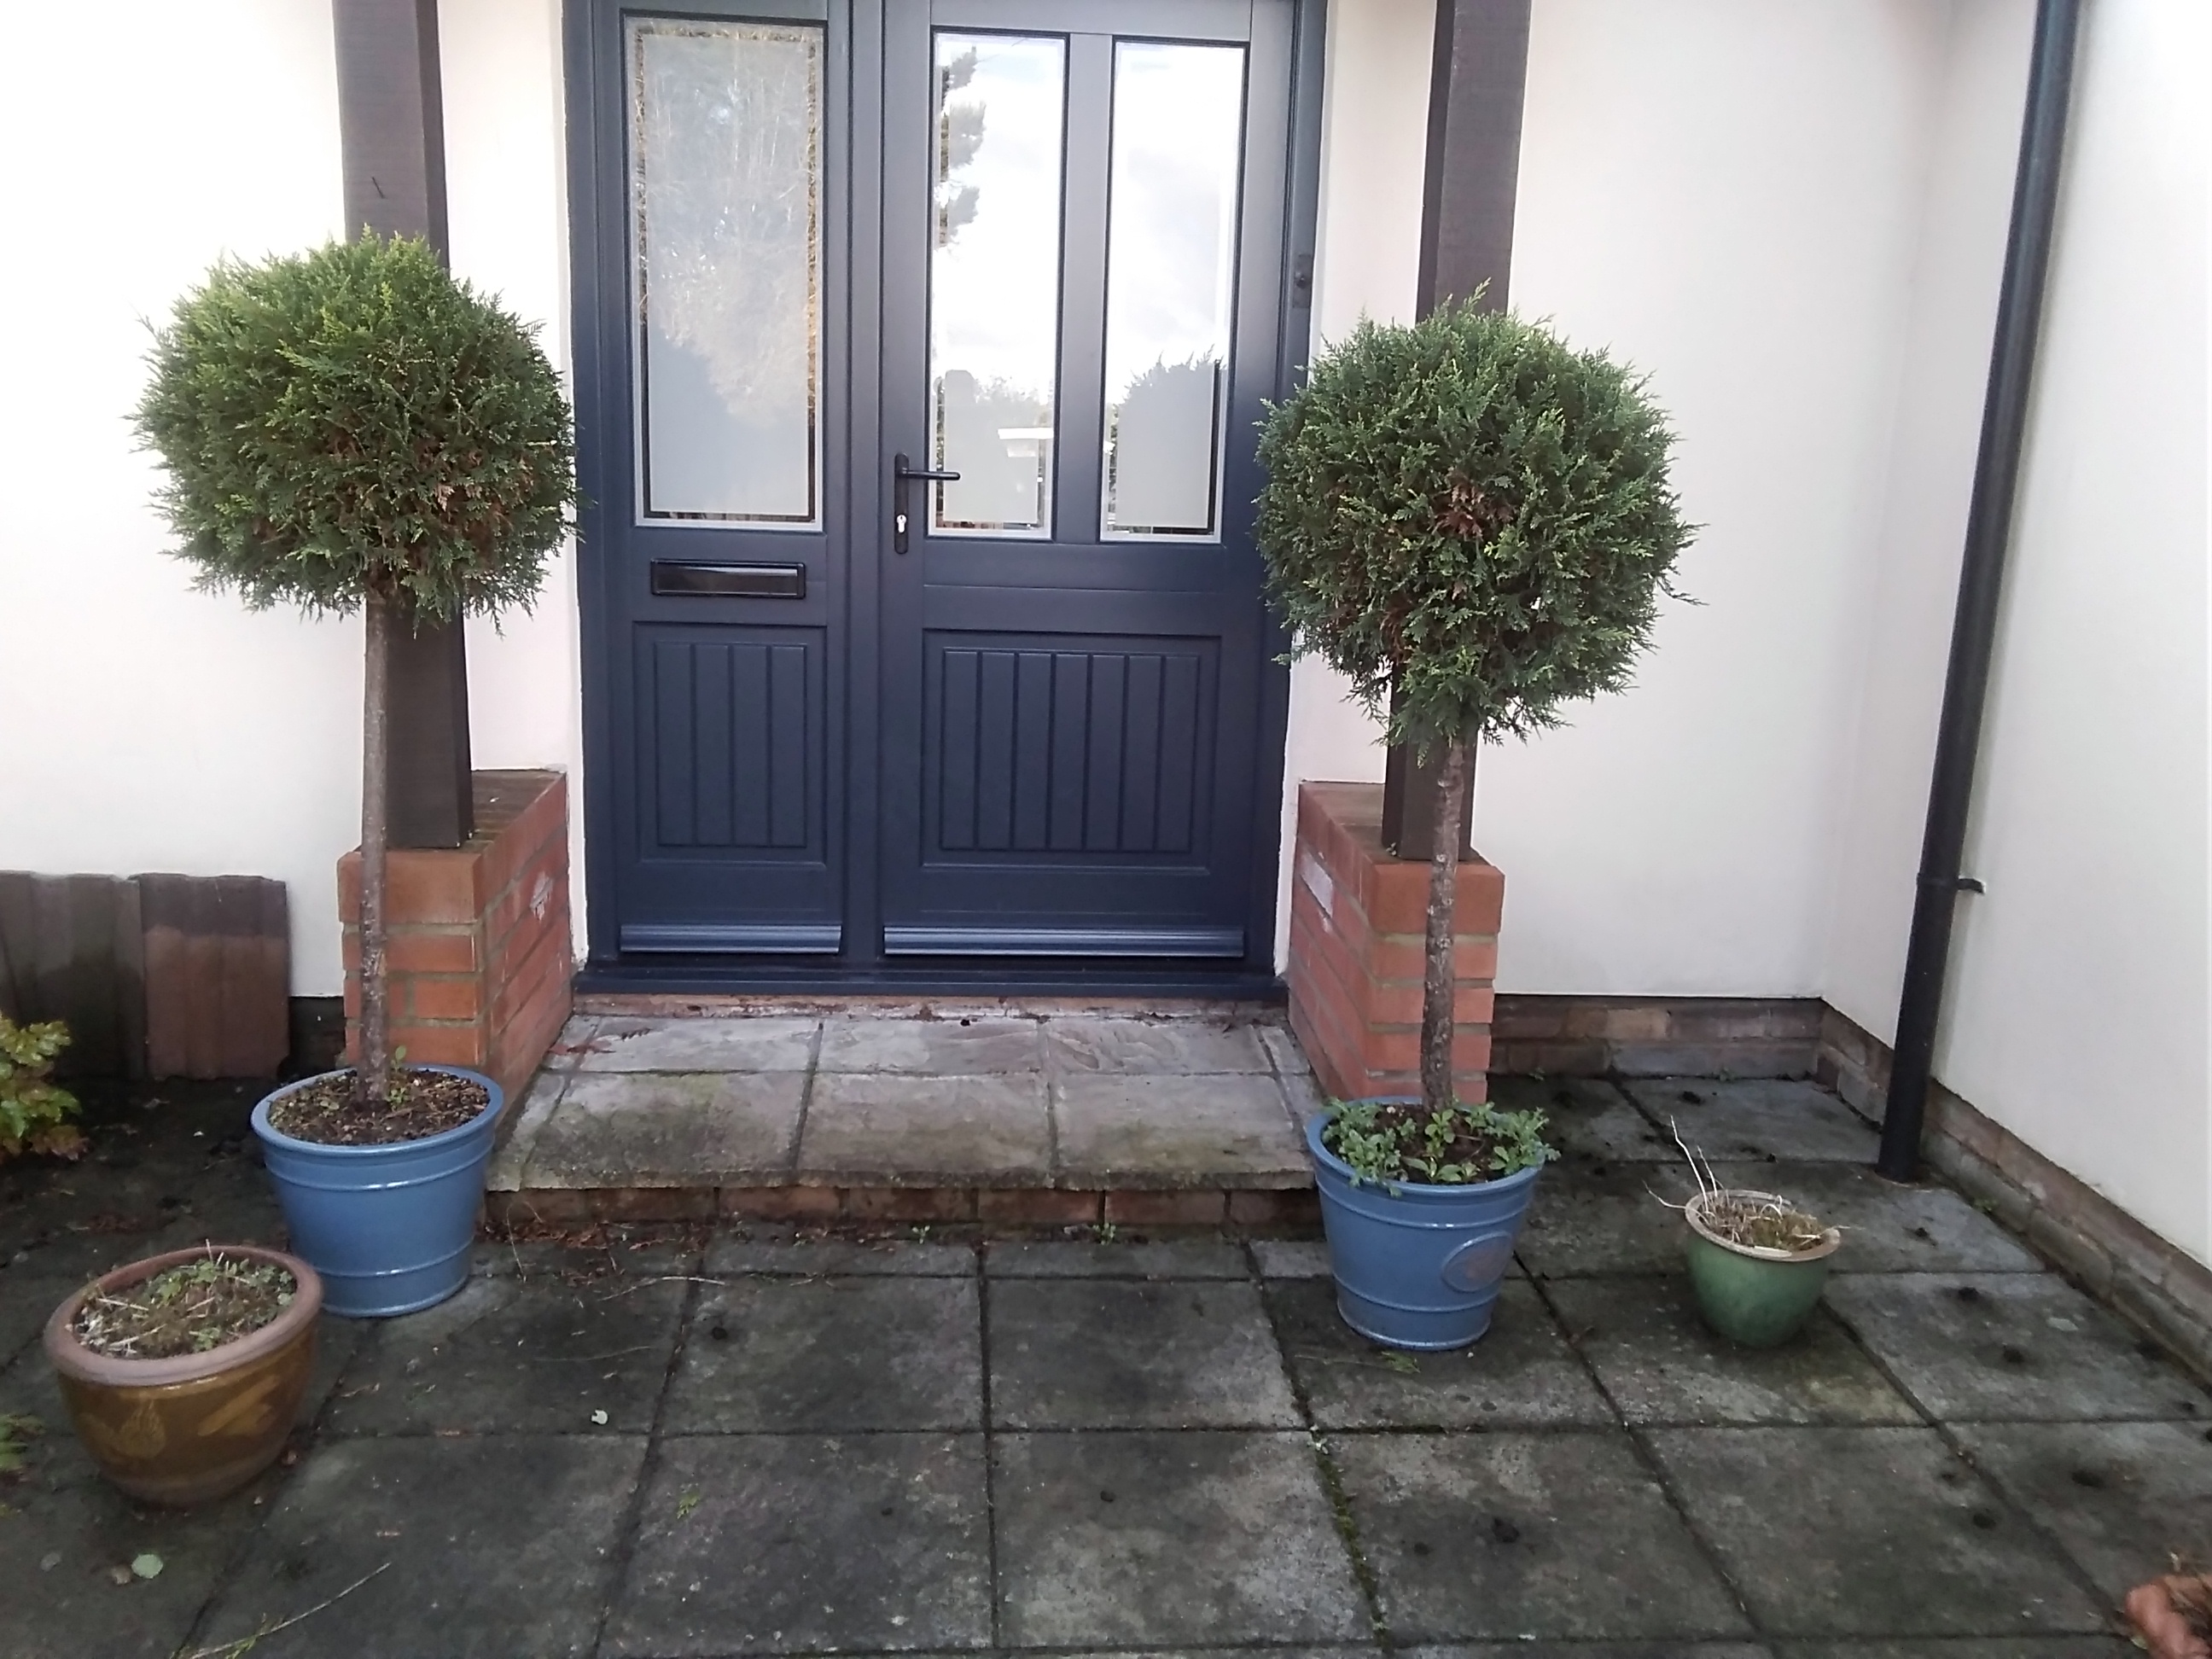 Pot small shrubs for shade drive? - Page 1 - Homes, Gardens and DIY - PistonHeads